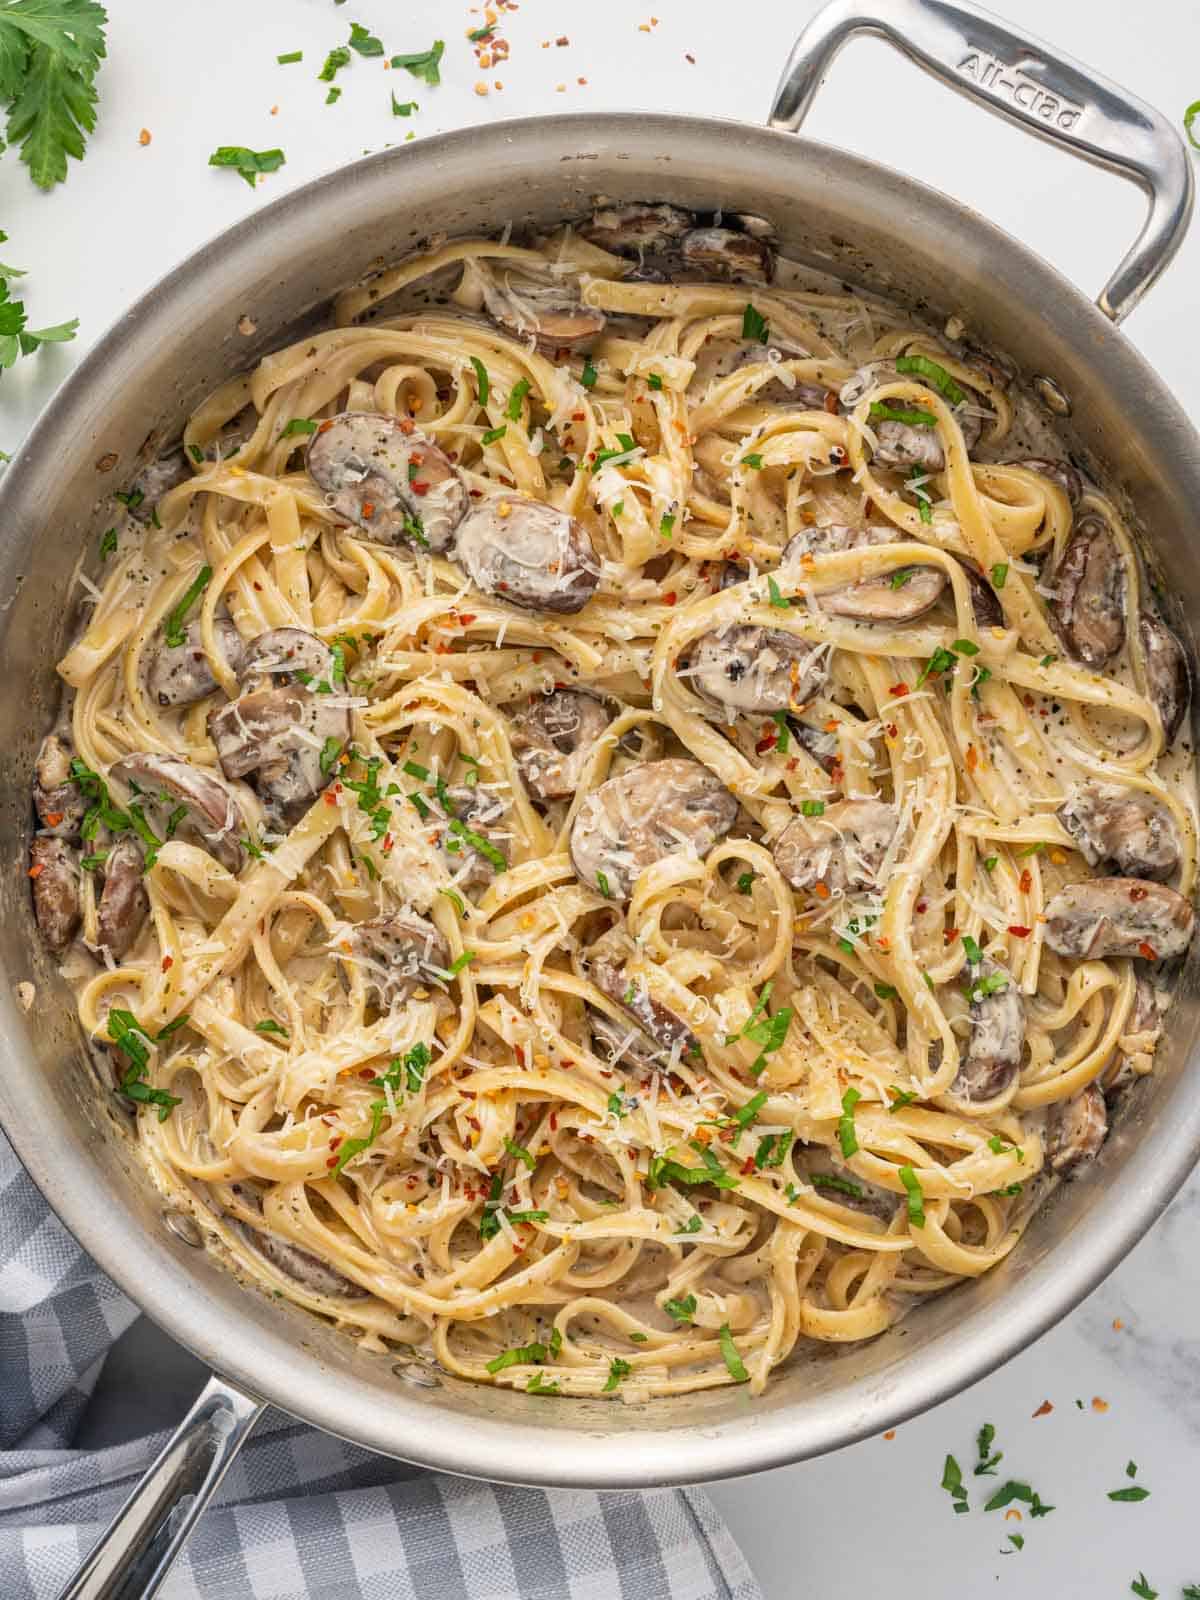 A skillet loaded with fettuccine with mushroom sauce.